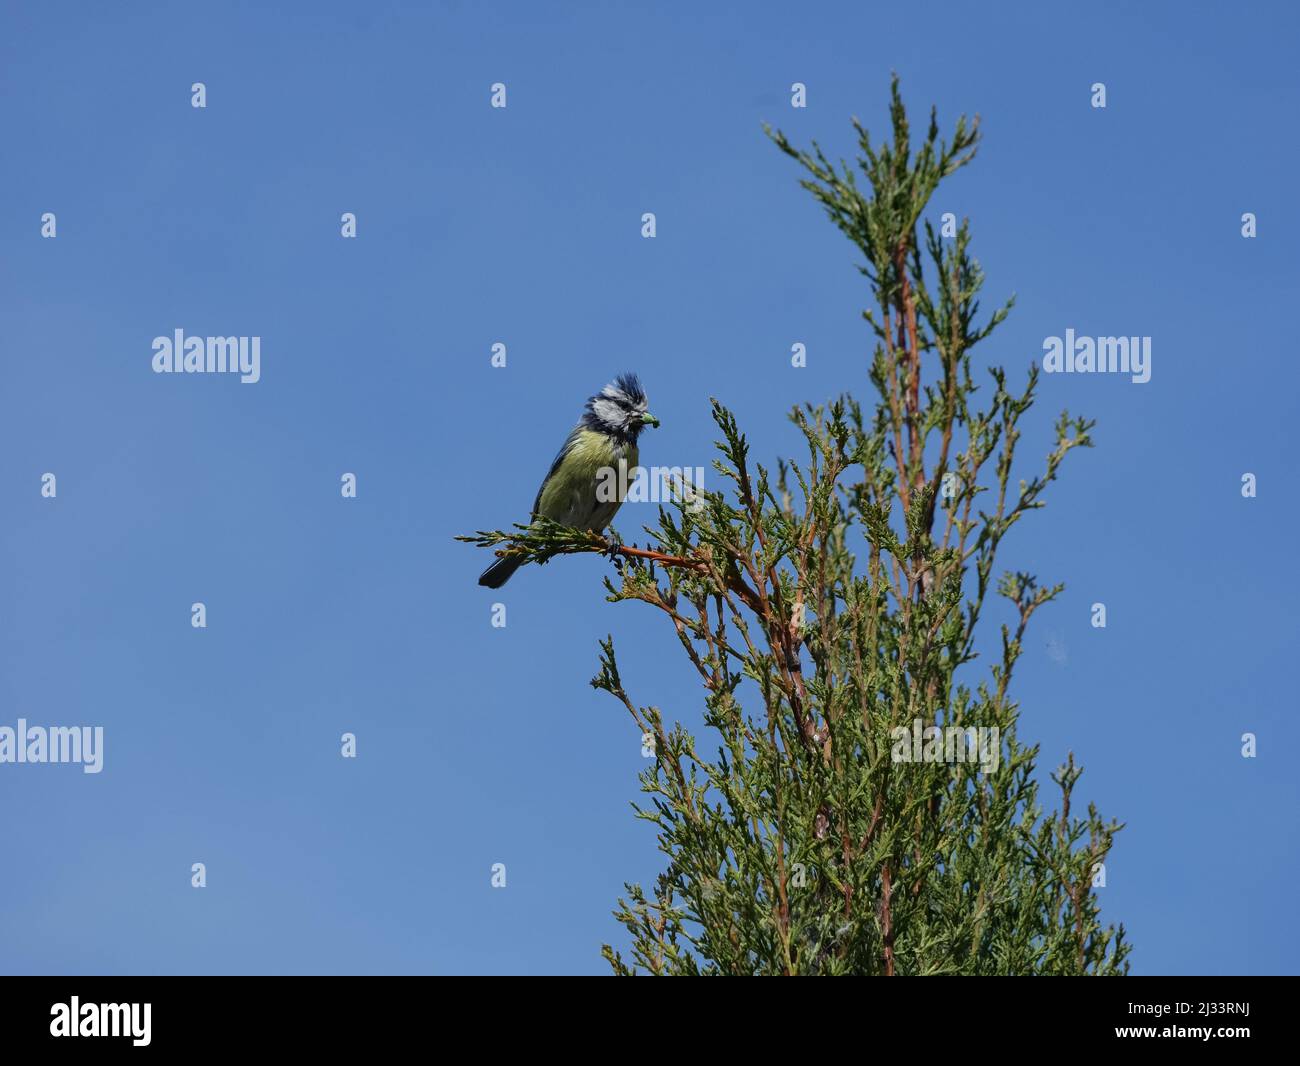 Great Tit sitting on a tree branch Stock Photo